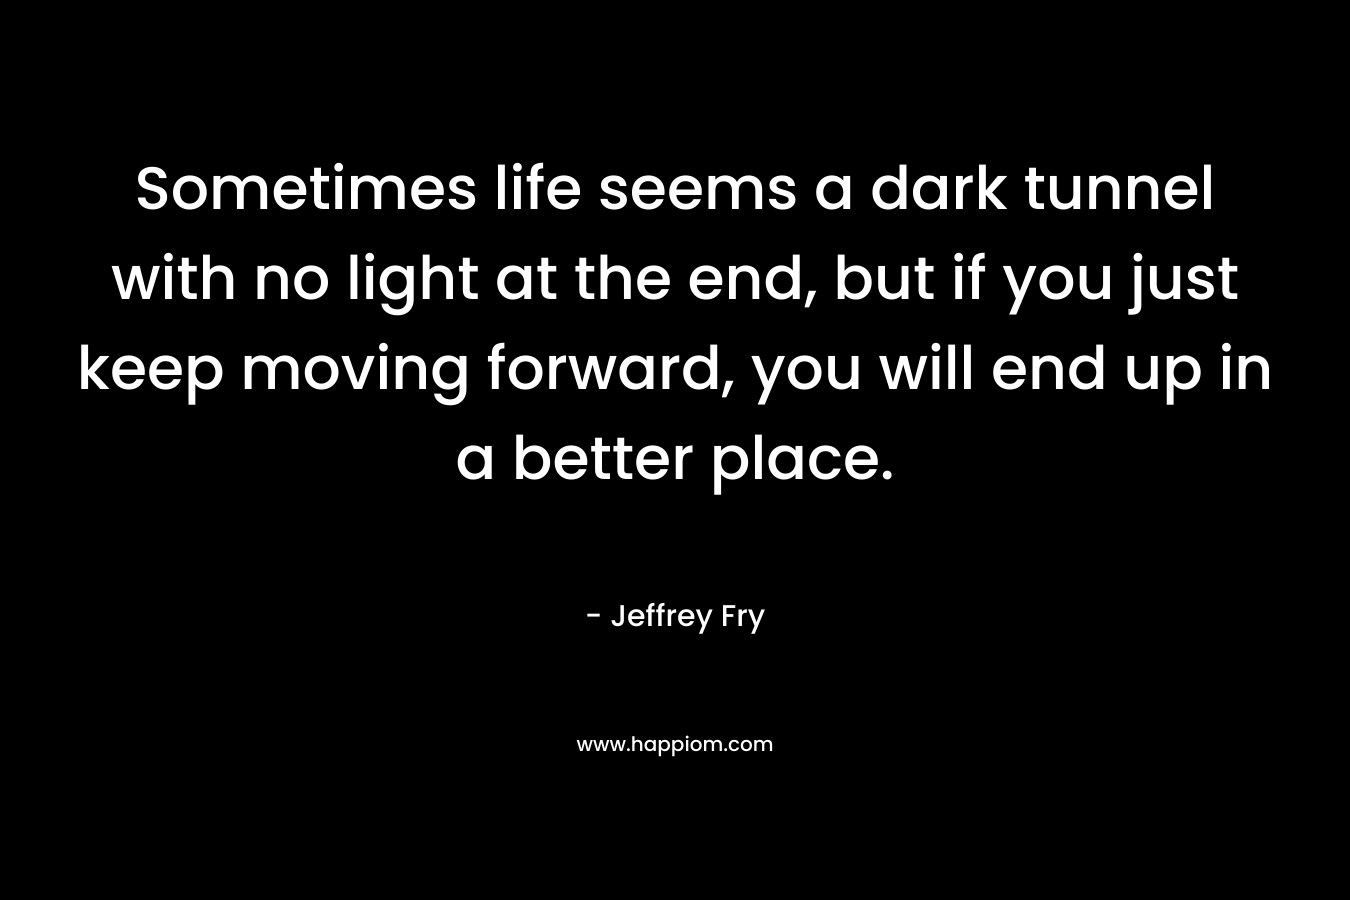 Sometimes life seems a dark tunnel with no light at the end, but if you just keep moving forward, you will end up in a better place.